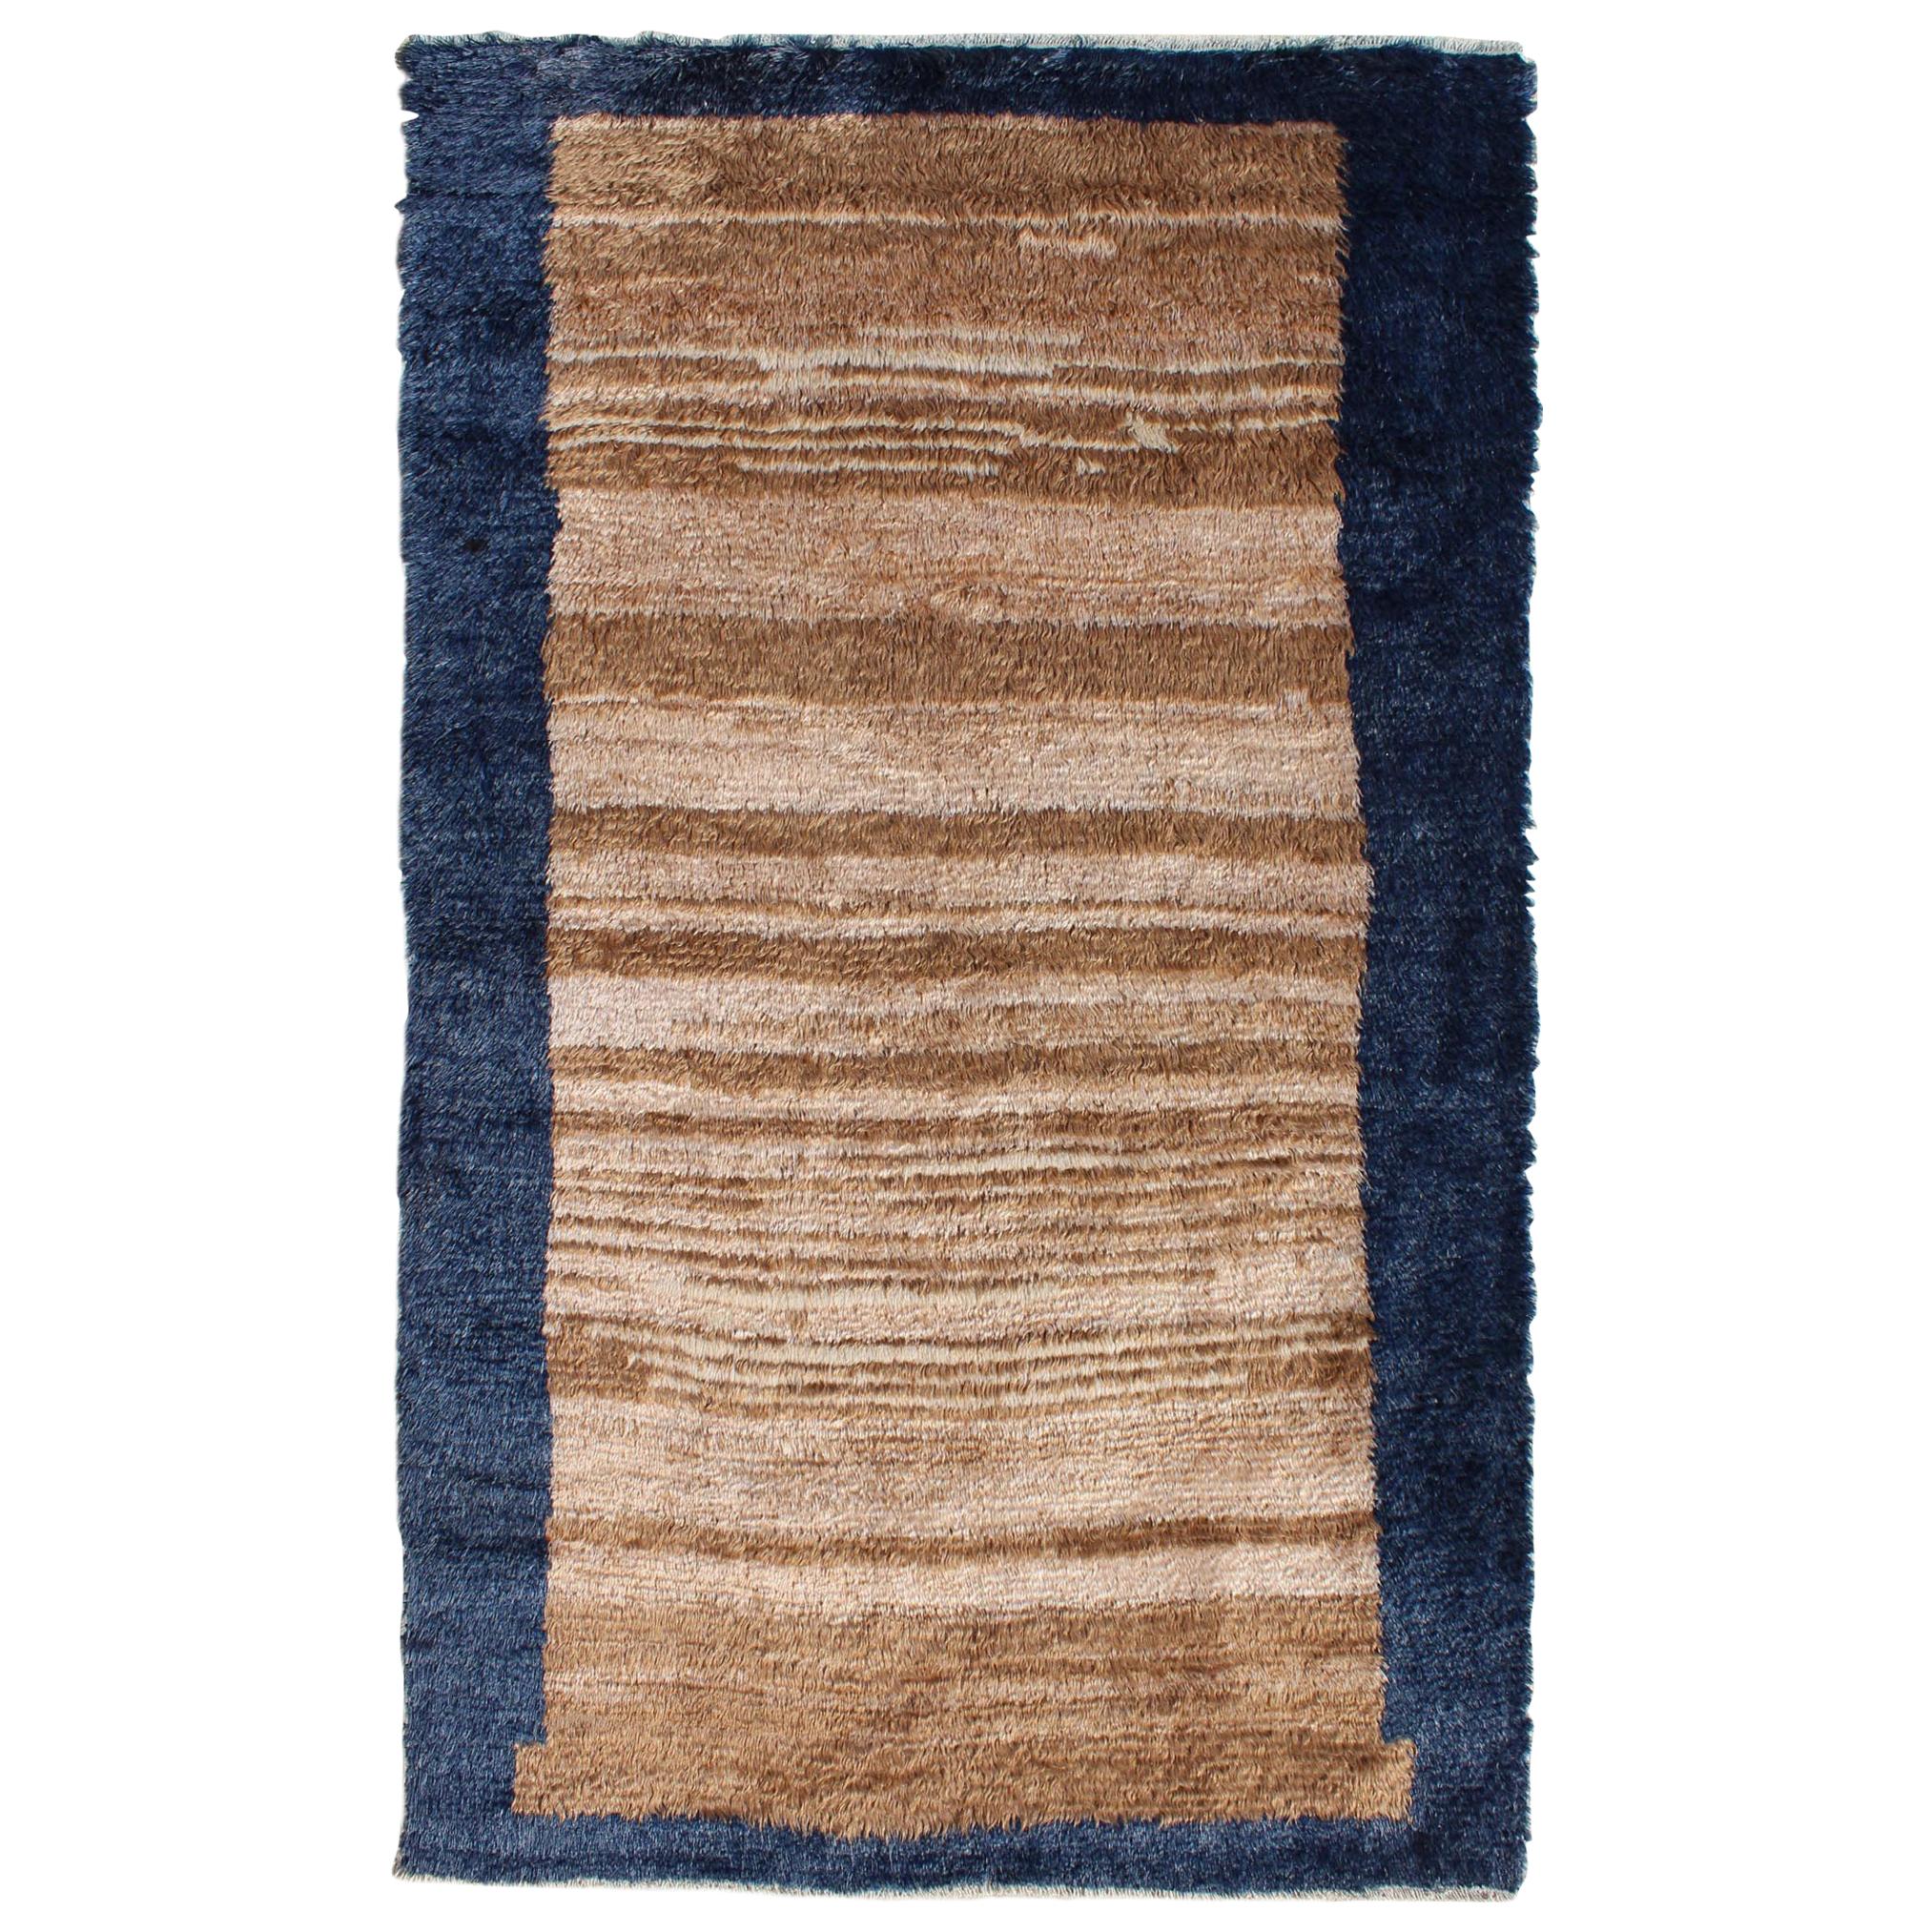 Angora Turkish Tulu Rug with Solid Field in Shades of Brown and Midnight Blue For Sale